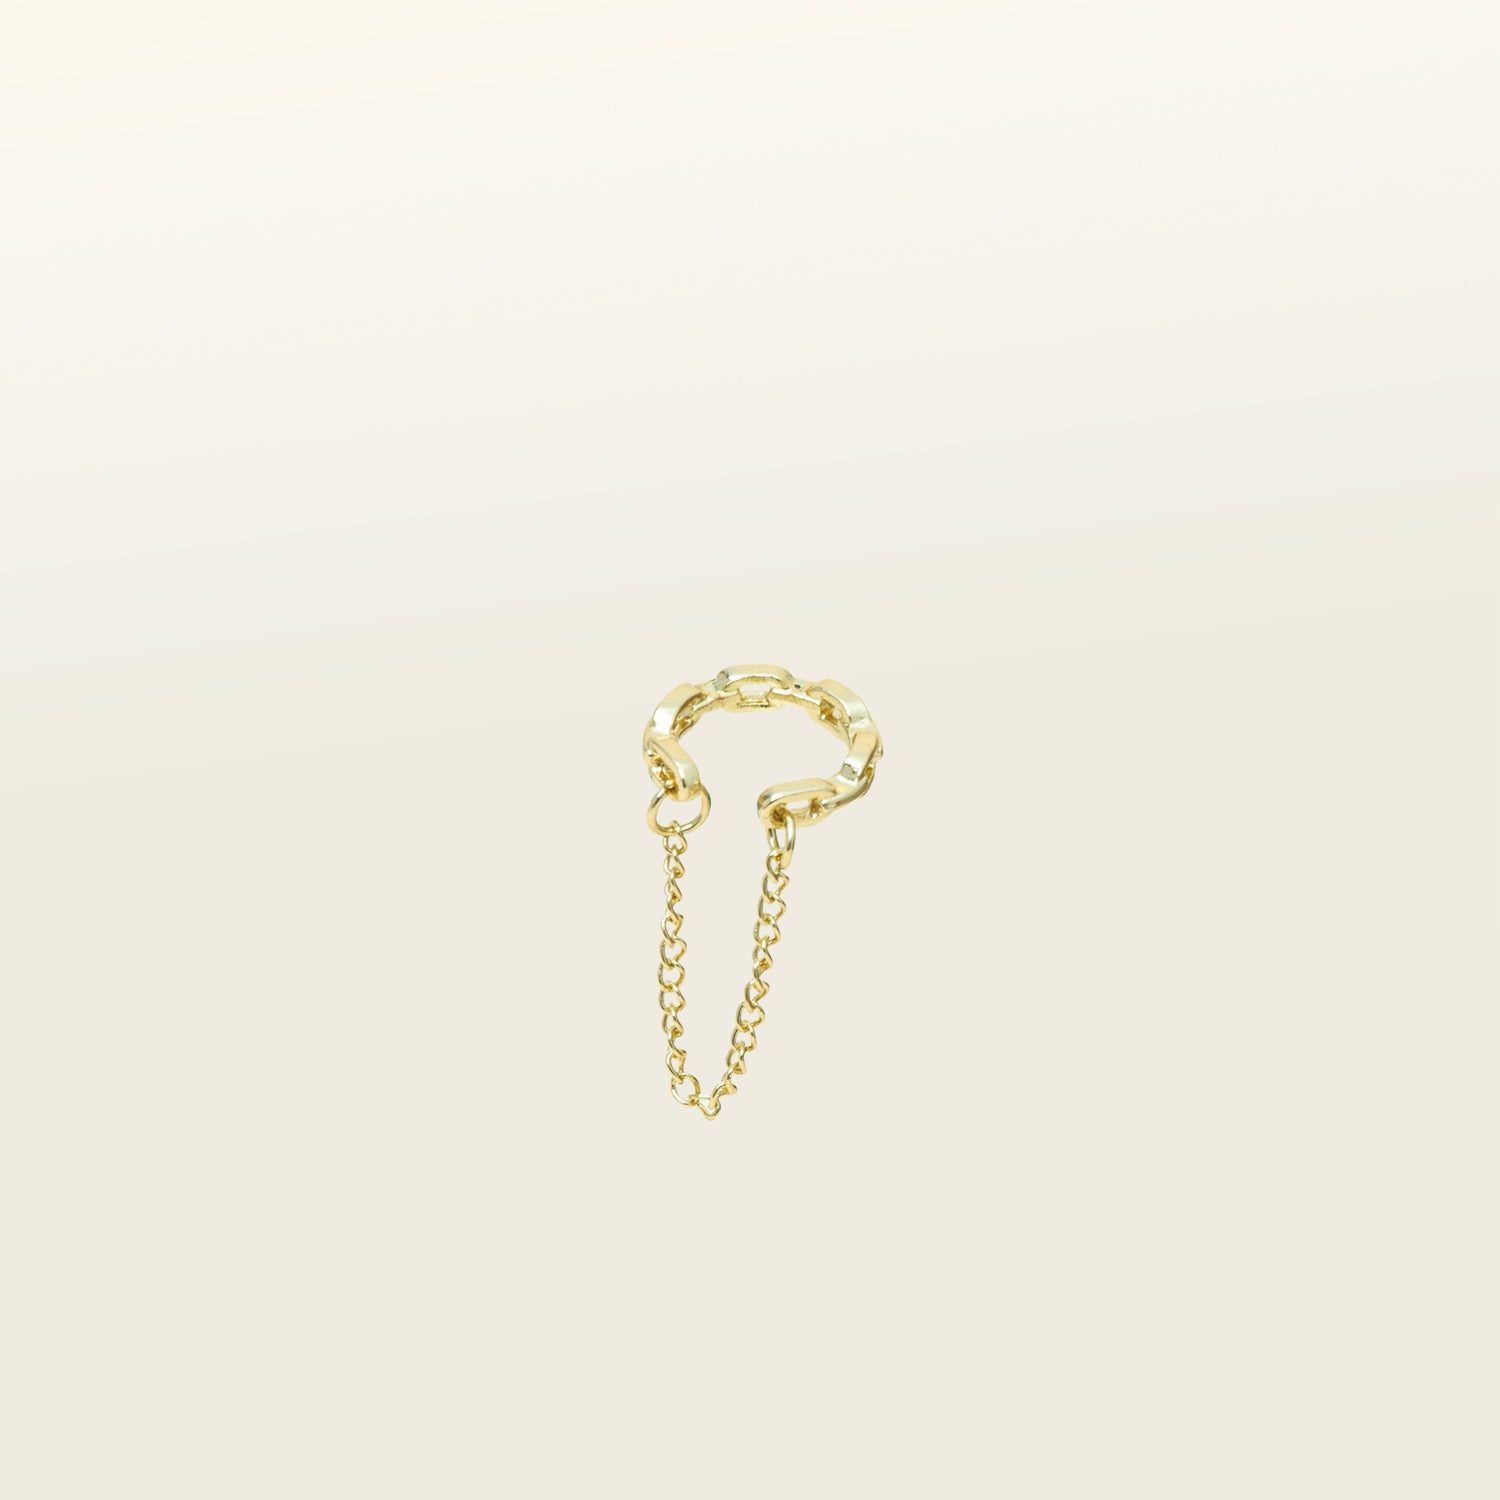 Catalogue Image of a modern Dual Chain Ear Cuff crafted from Goldtone or Silvertone plated zinc alloy. This trendy accessory features a delicate chain, designed to elegantly adorn the earlobe of both men and women.